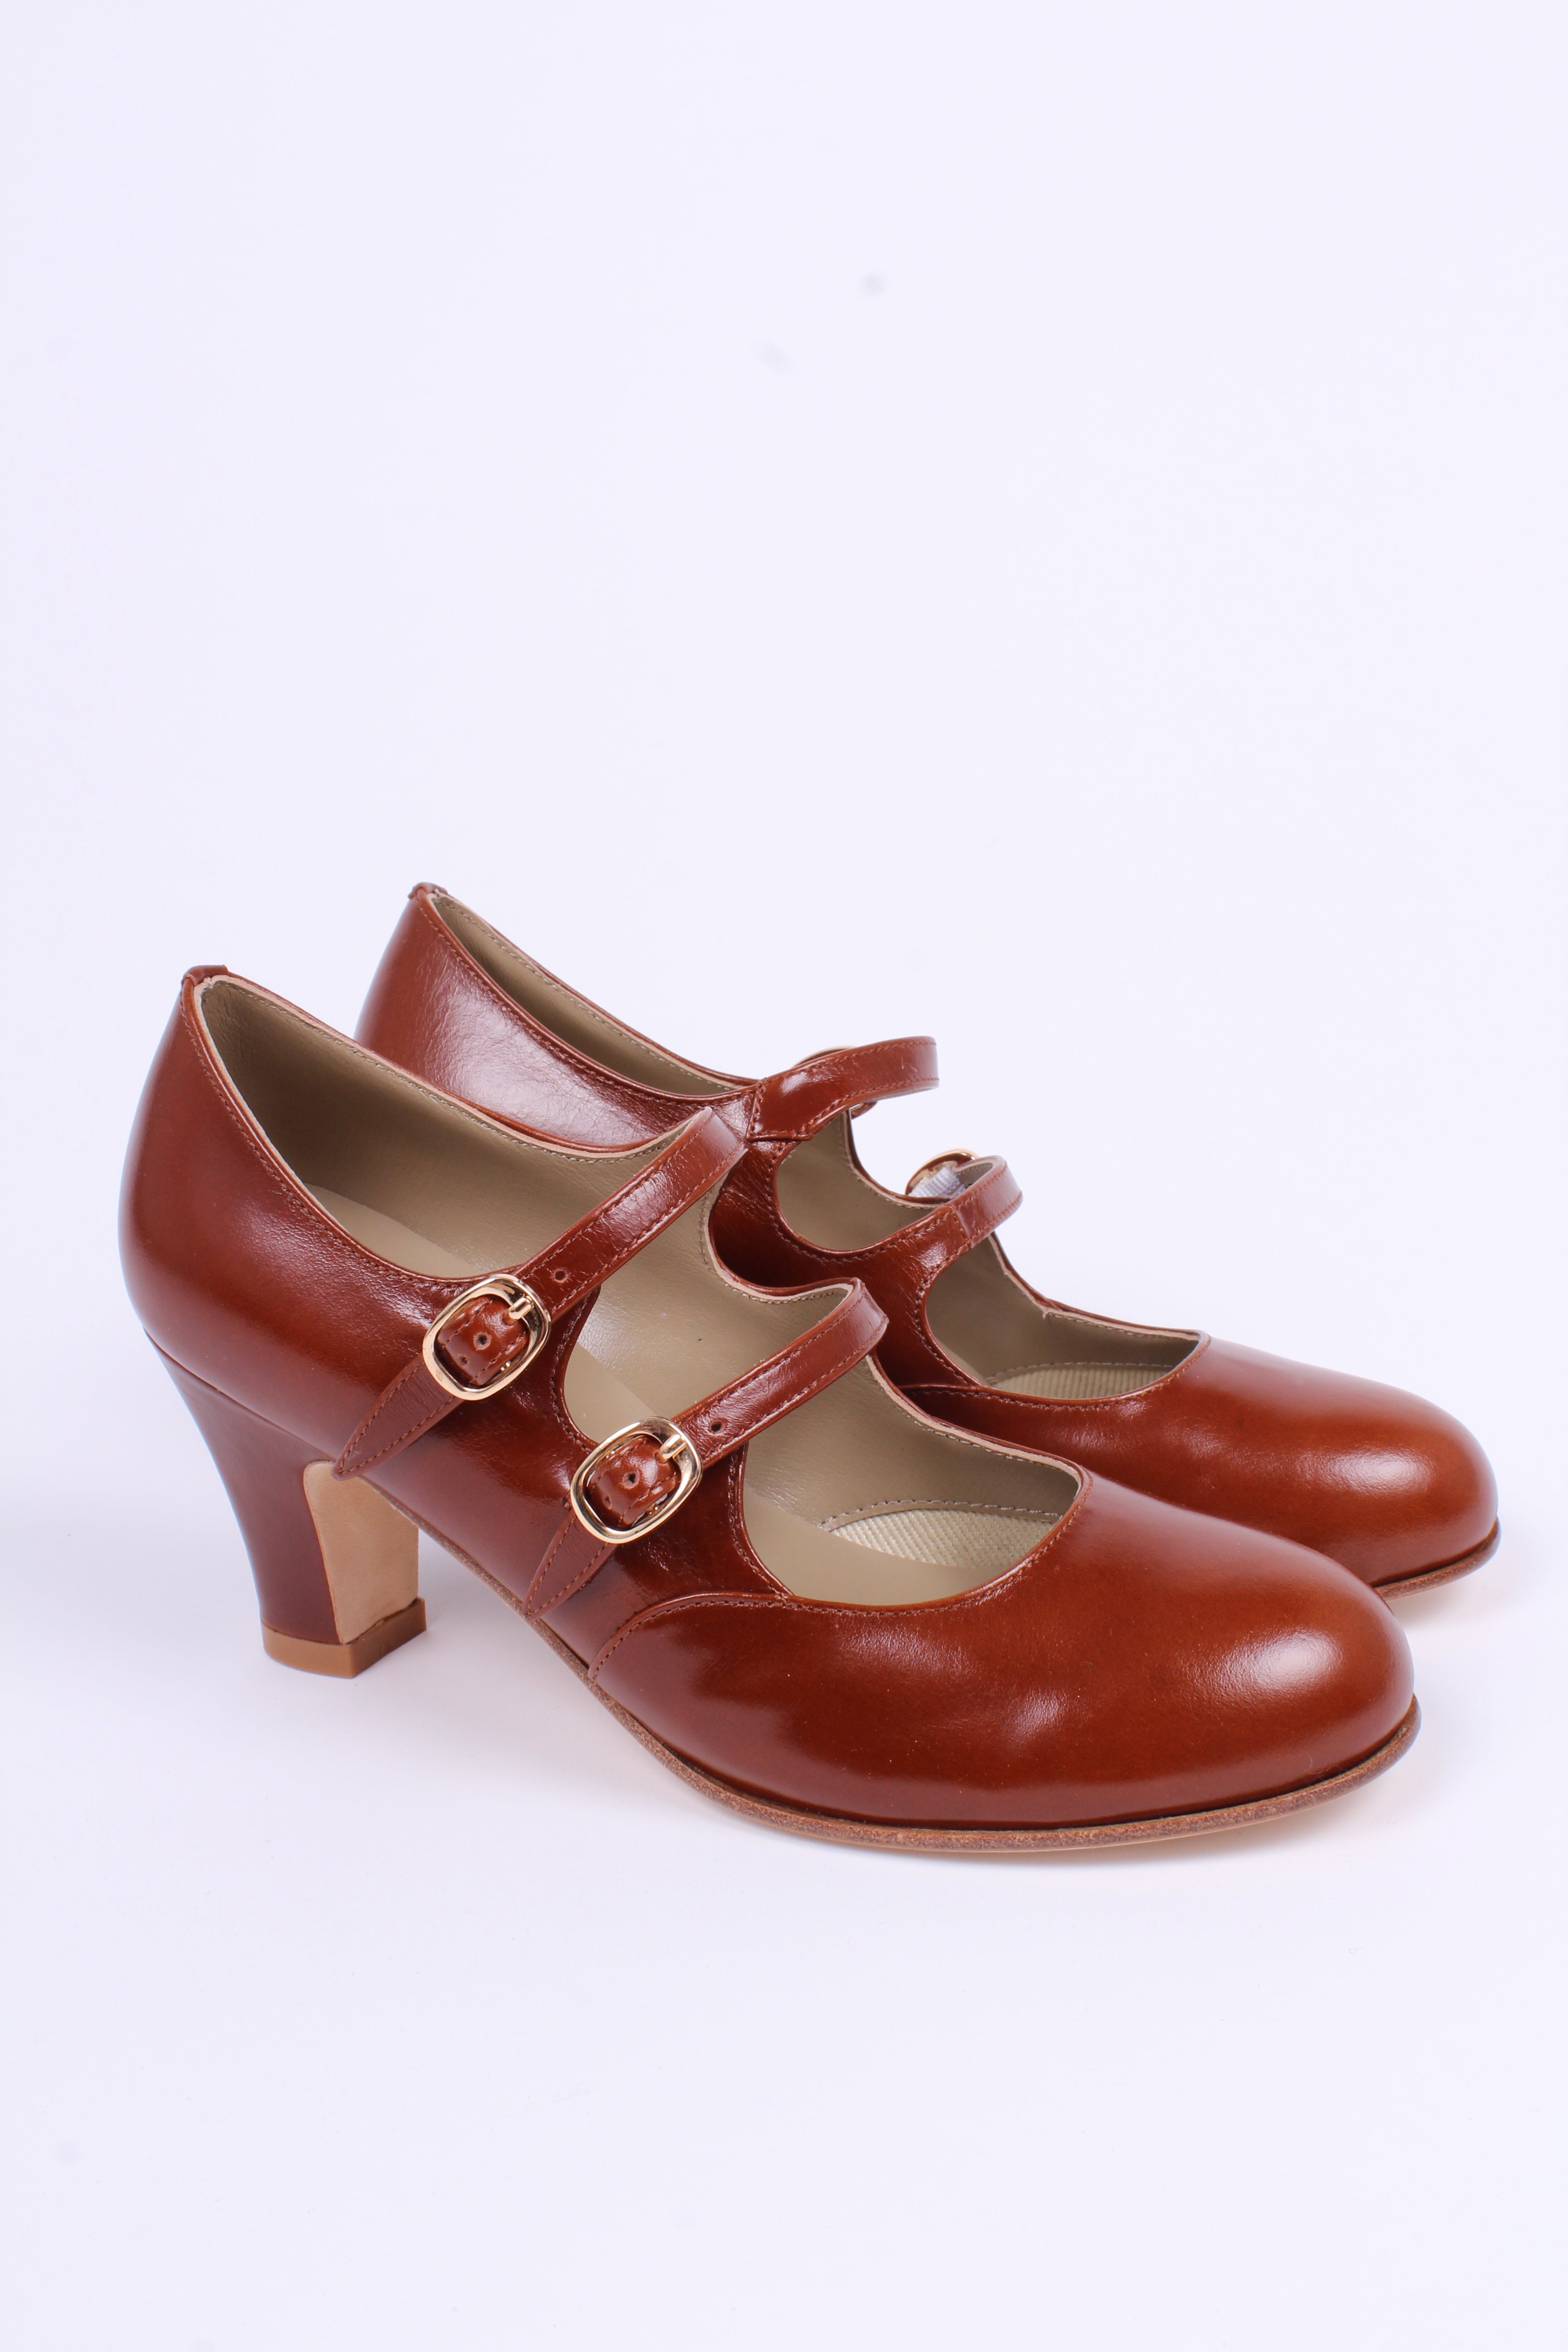 20s / early 30s style leather pumps - Cognac-brown - Judy